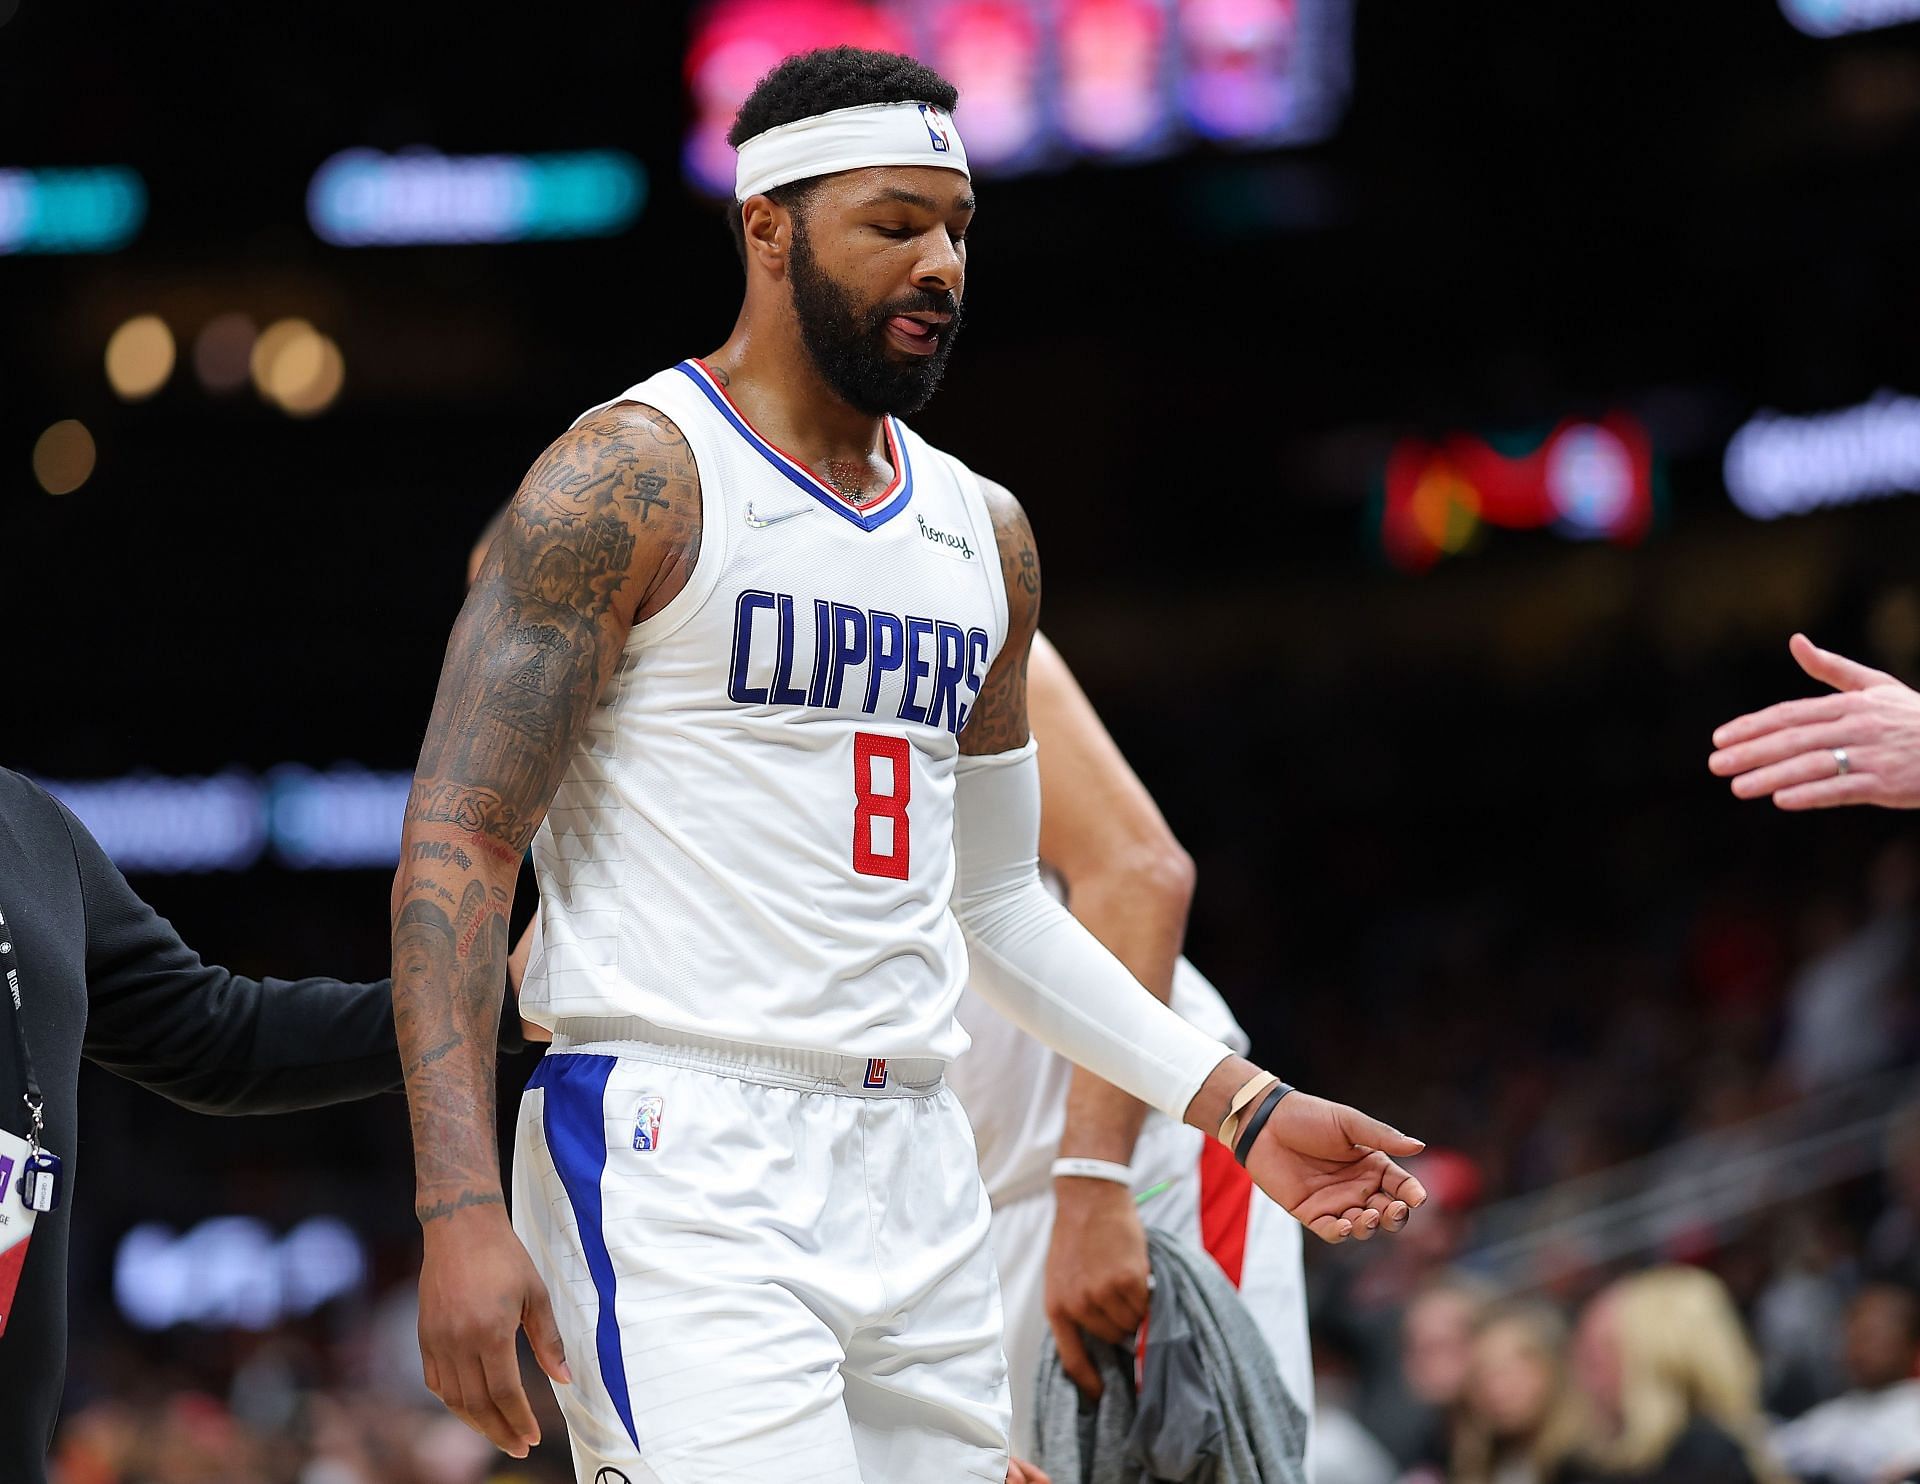 Marcus Morris Sr. brings versatility, grit and toughness to the LA Clippers.